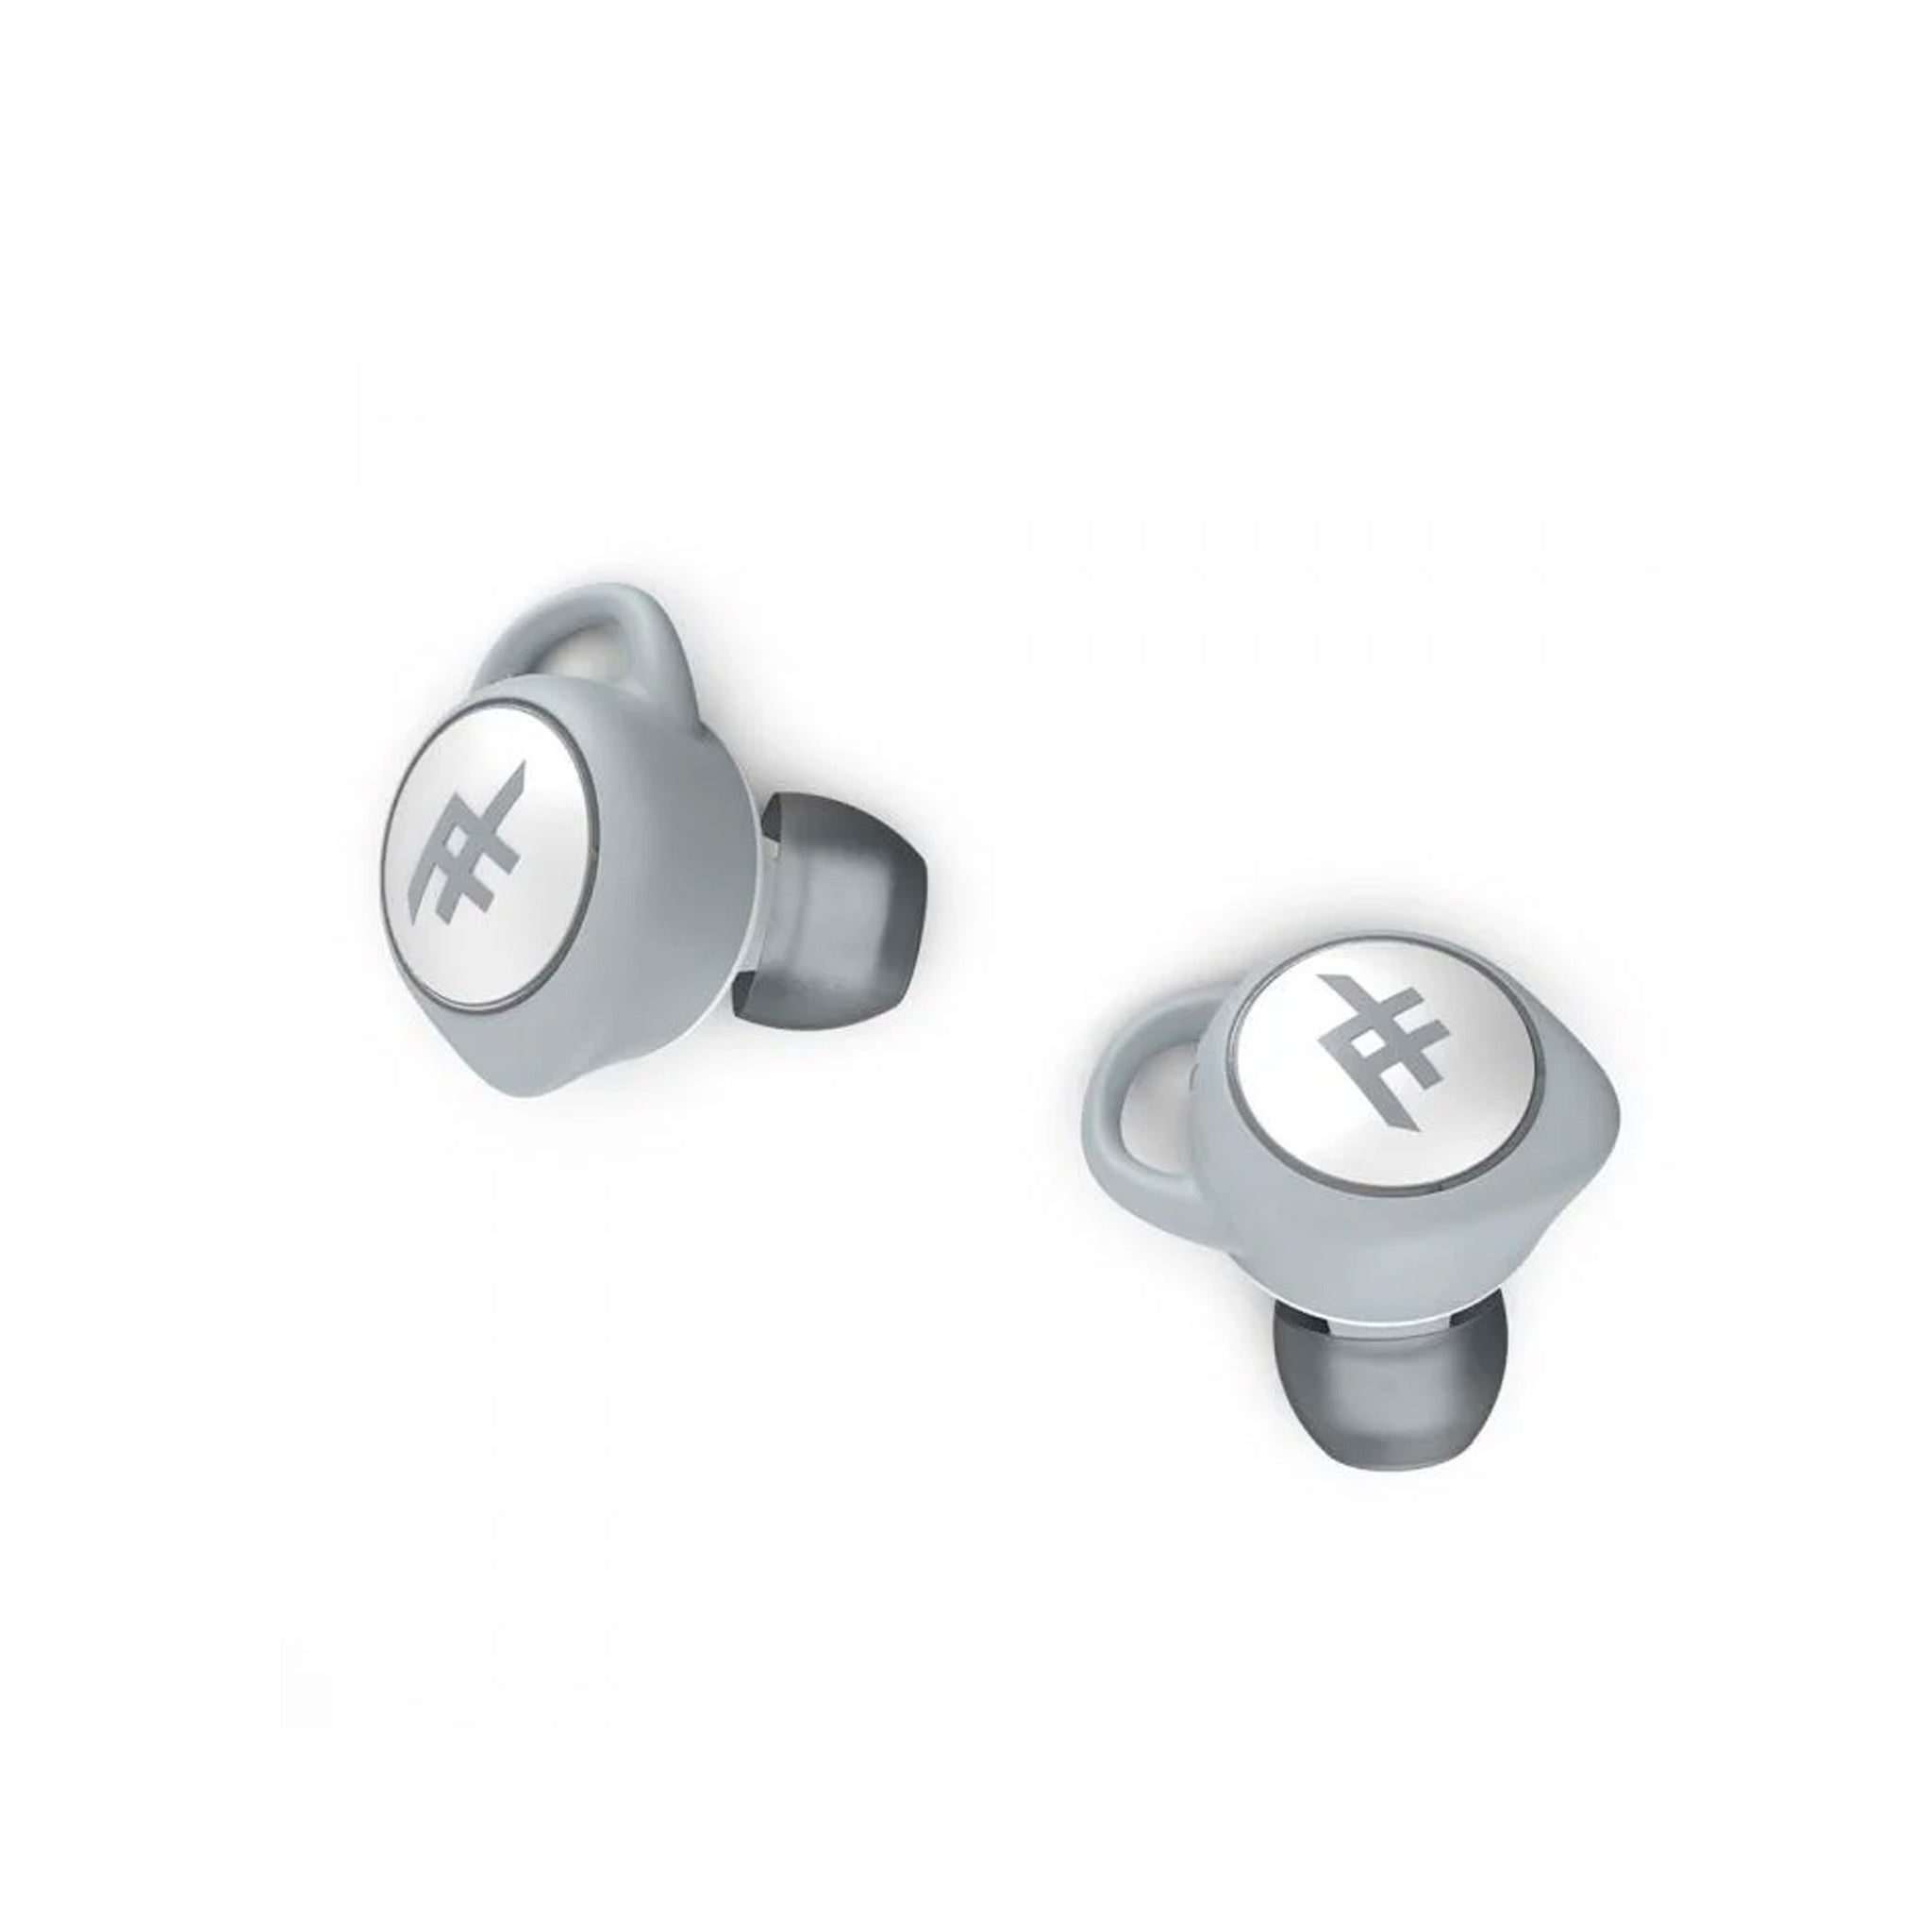 Ifrogz - Airtime True Wireless In Ear Bluetooth Earbuds - White